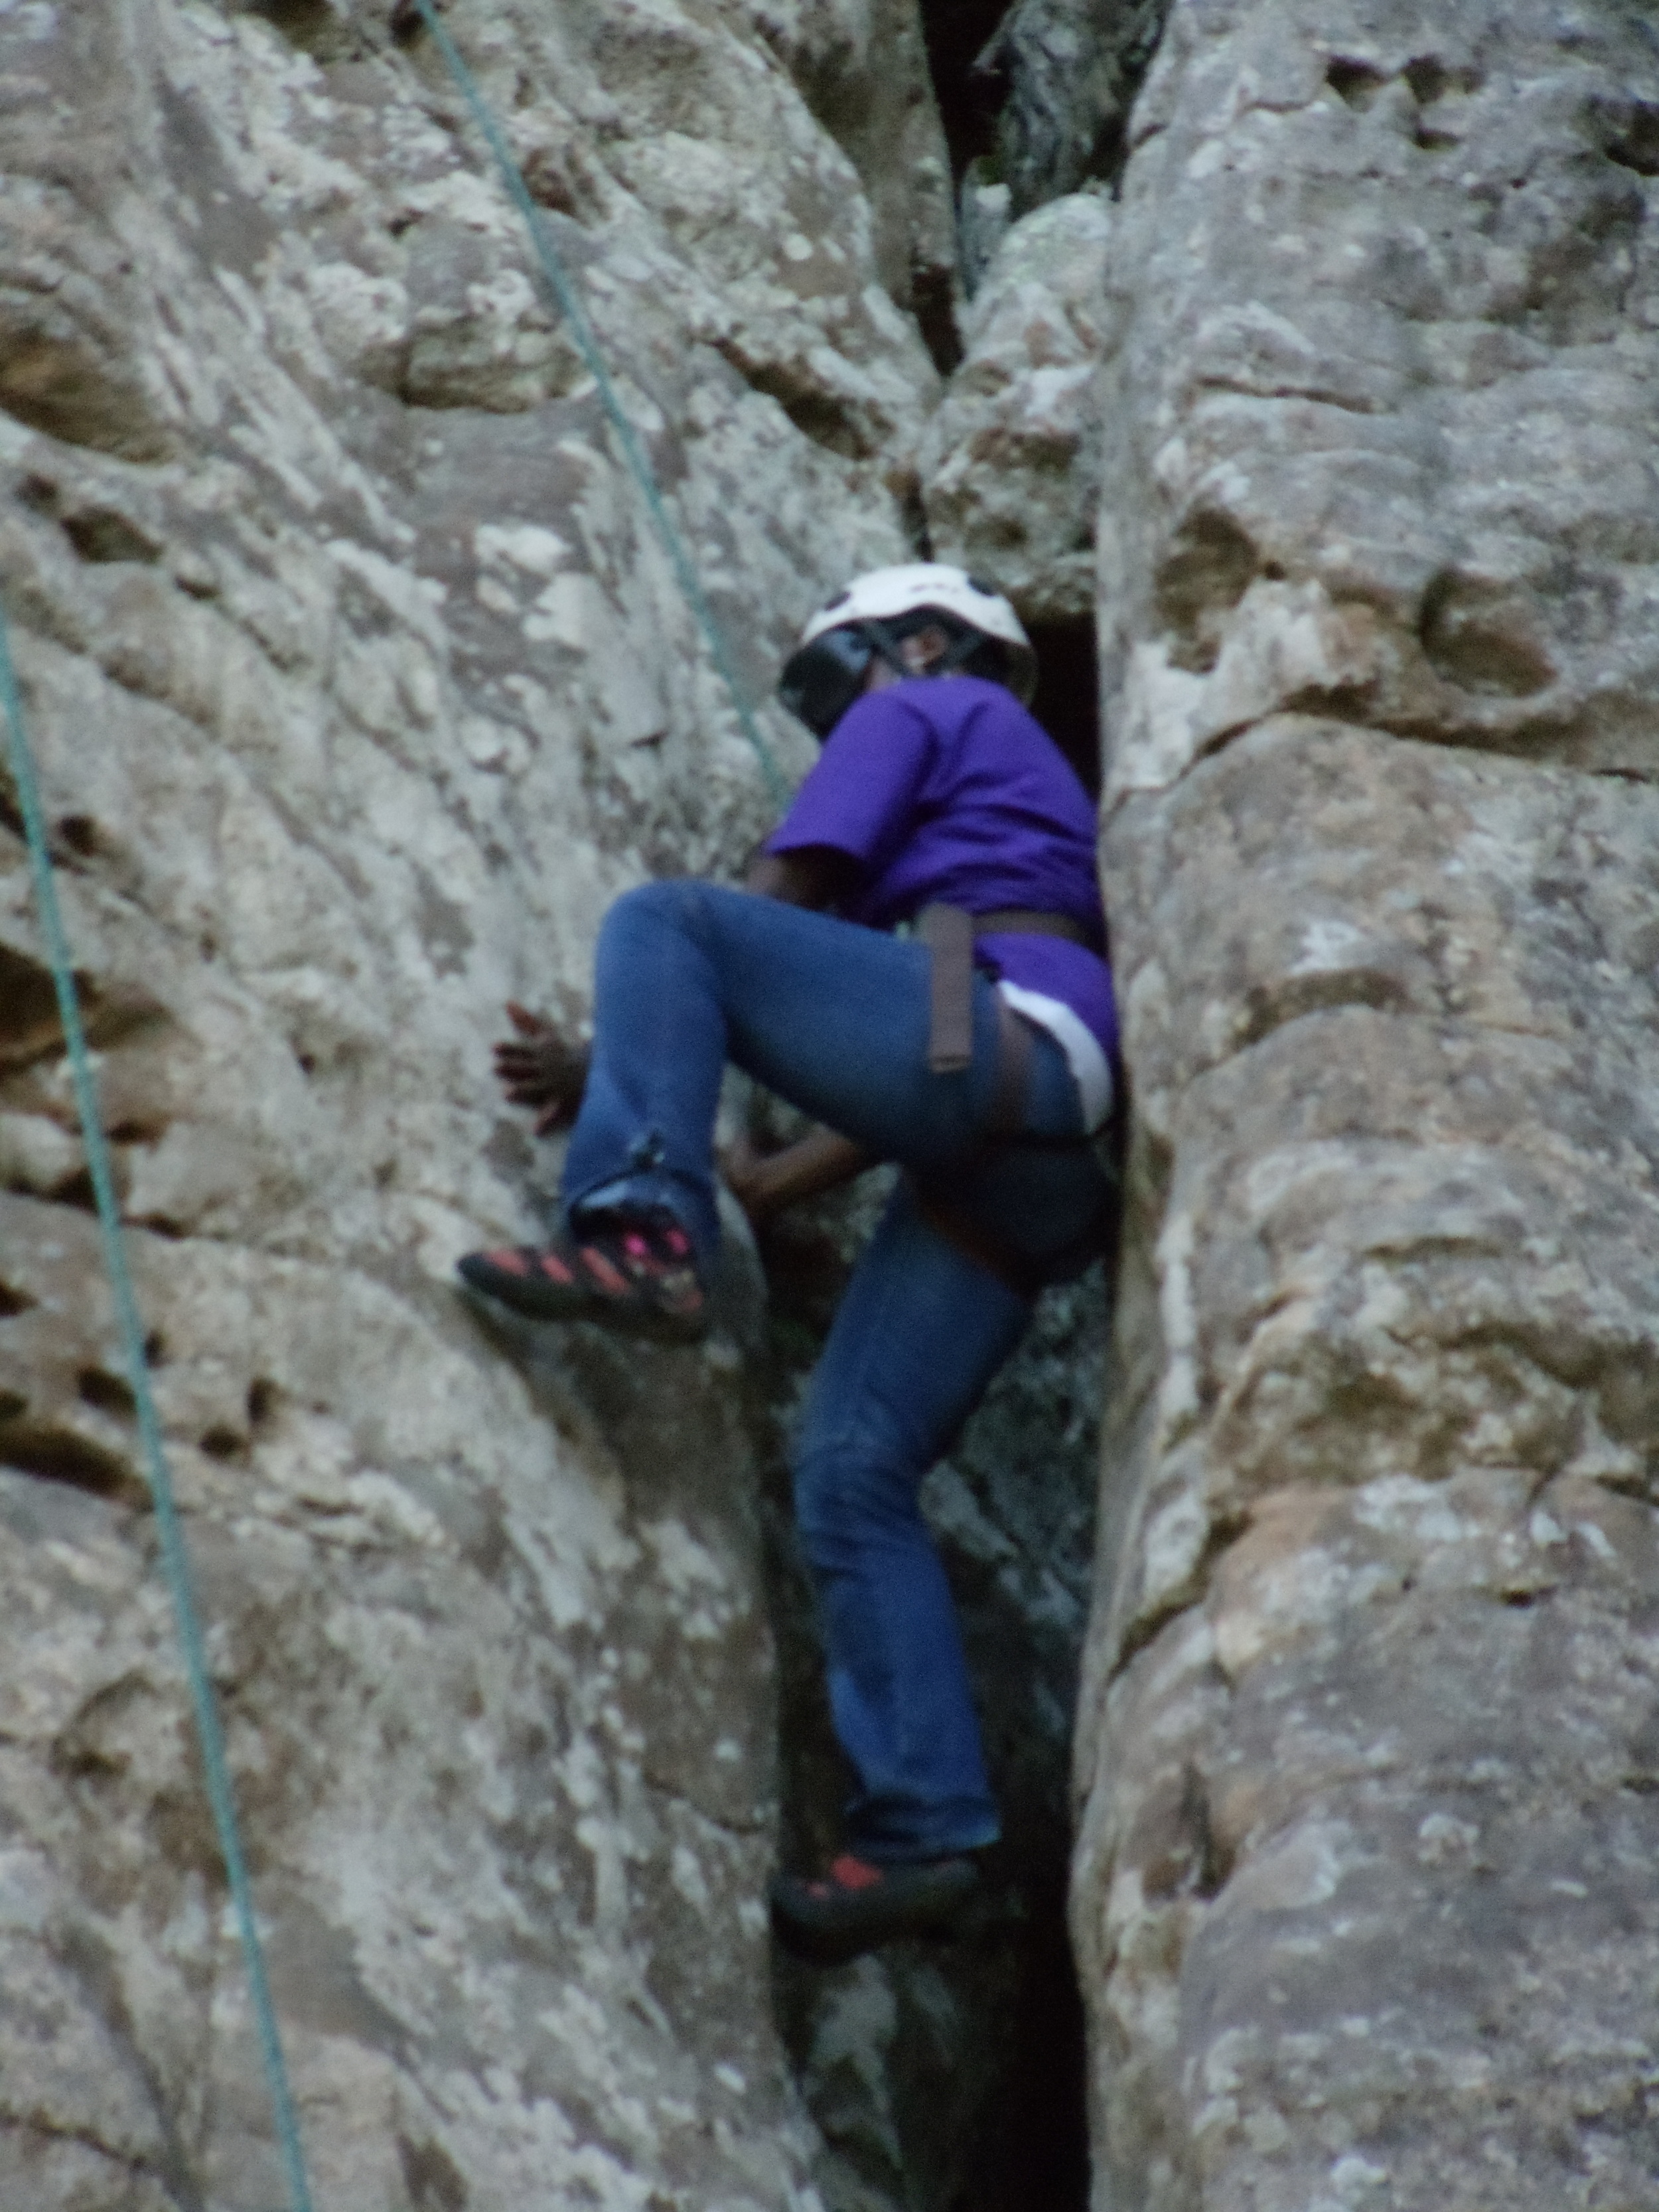 A close up of the "chimney" climb at HCR.